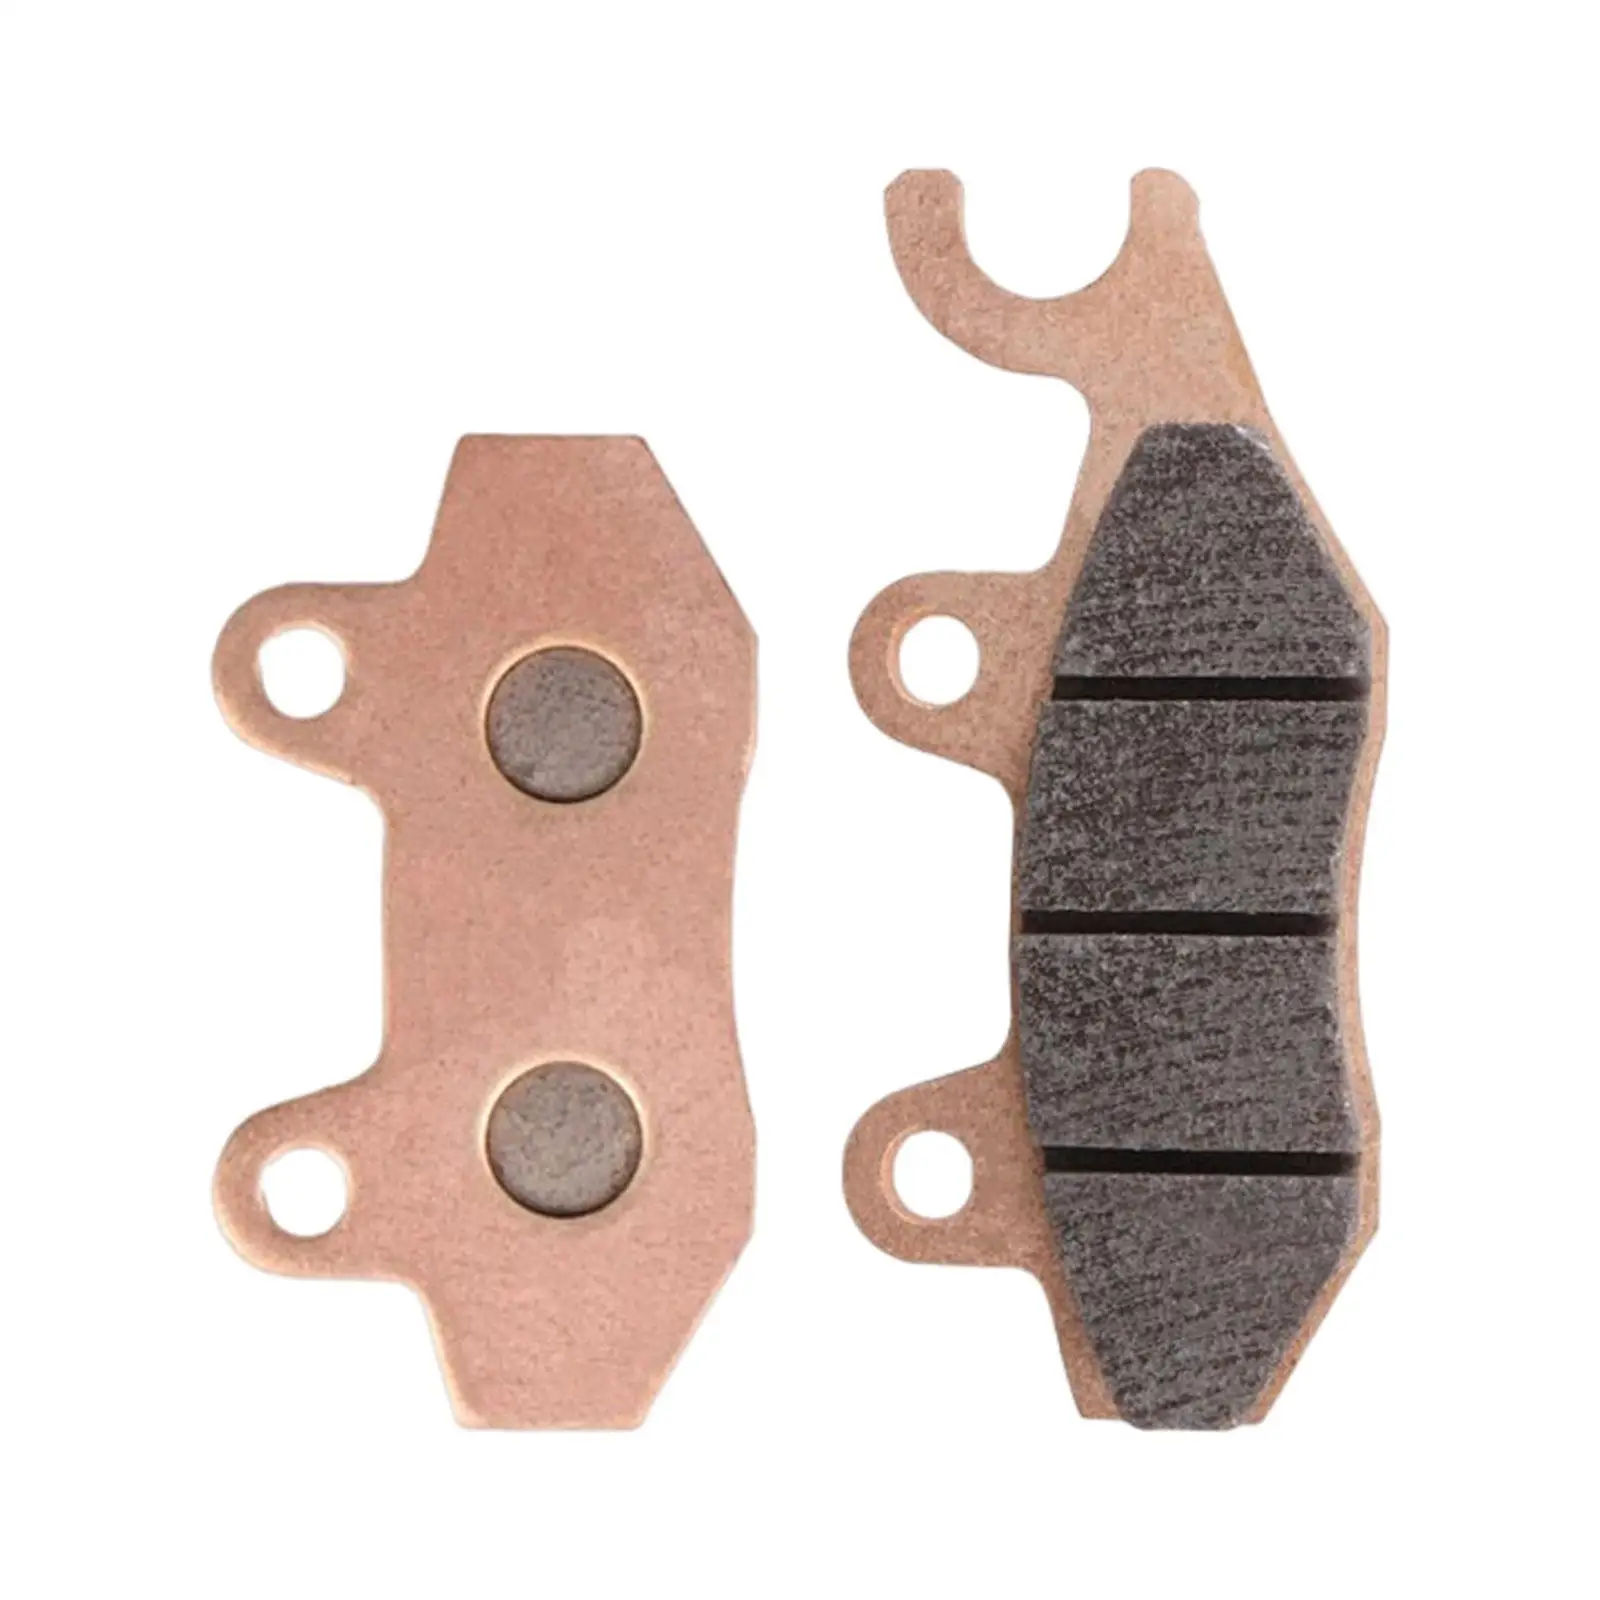 Motorcycle Brake Pads Set Sintered Copper based Replaces Sturdy for Ninja 250R EX300 Z300 Professional Vehicle Spare Parts